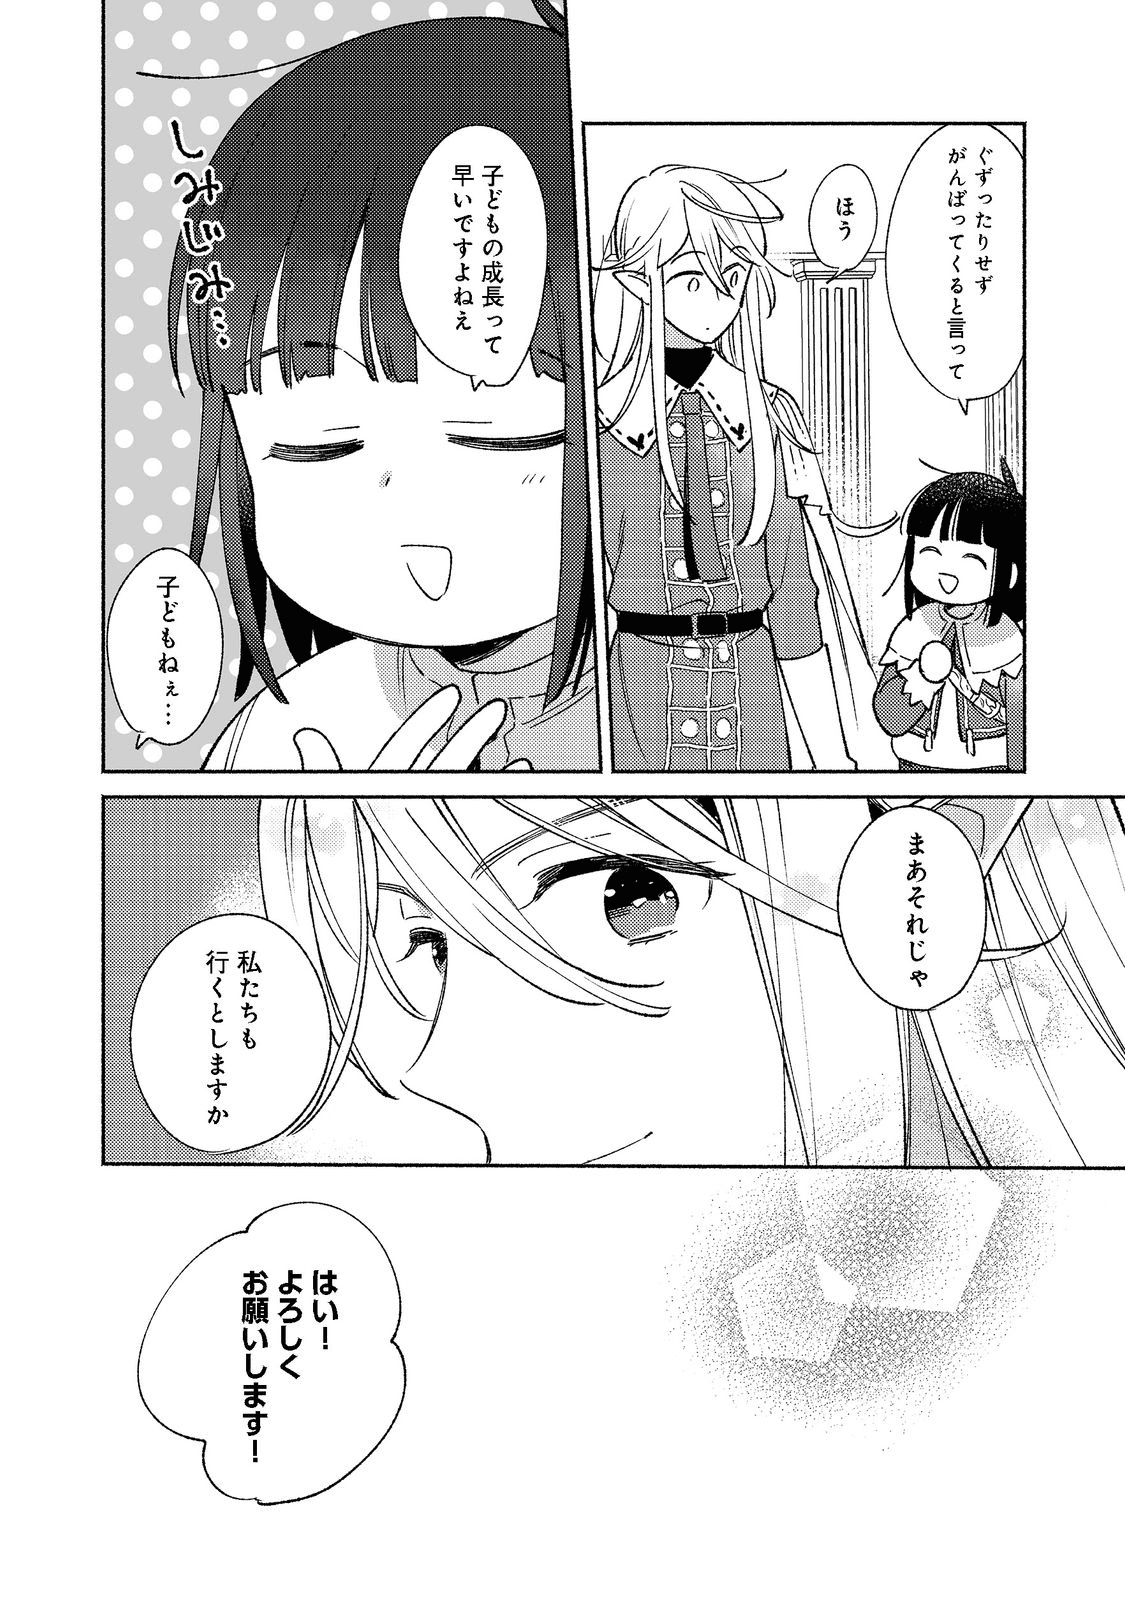 I’m the White Pig Nobleman 第14.2話 - Page 14